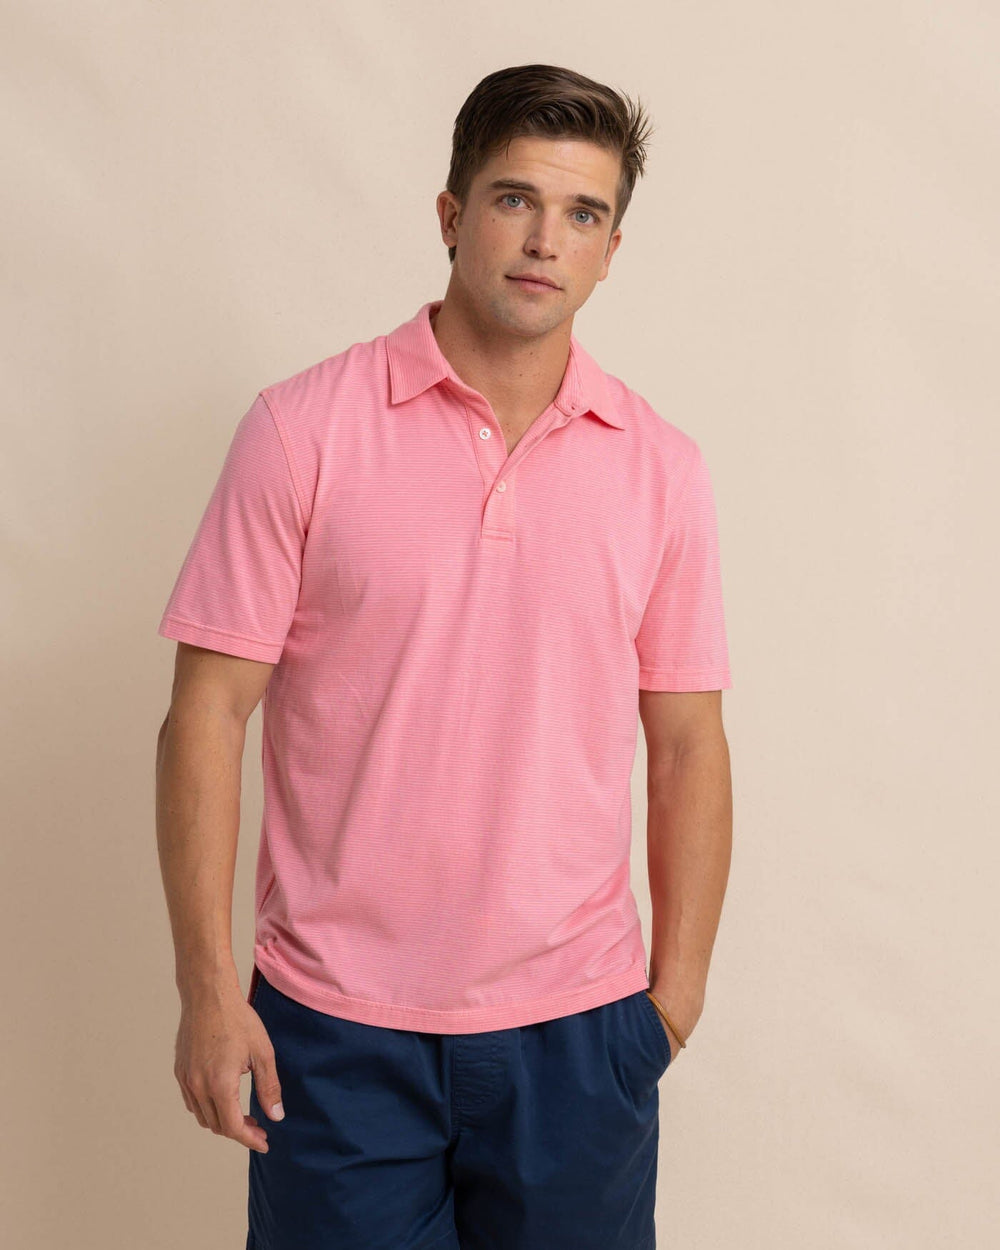 The front view of the Southern Tide The Seaport Davenport Stripe Polo by Southern Tide - Geranium Pink